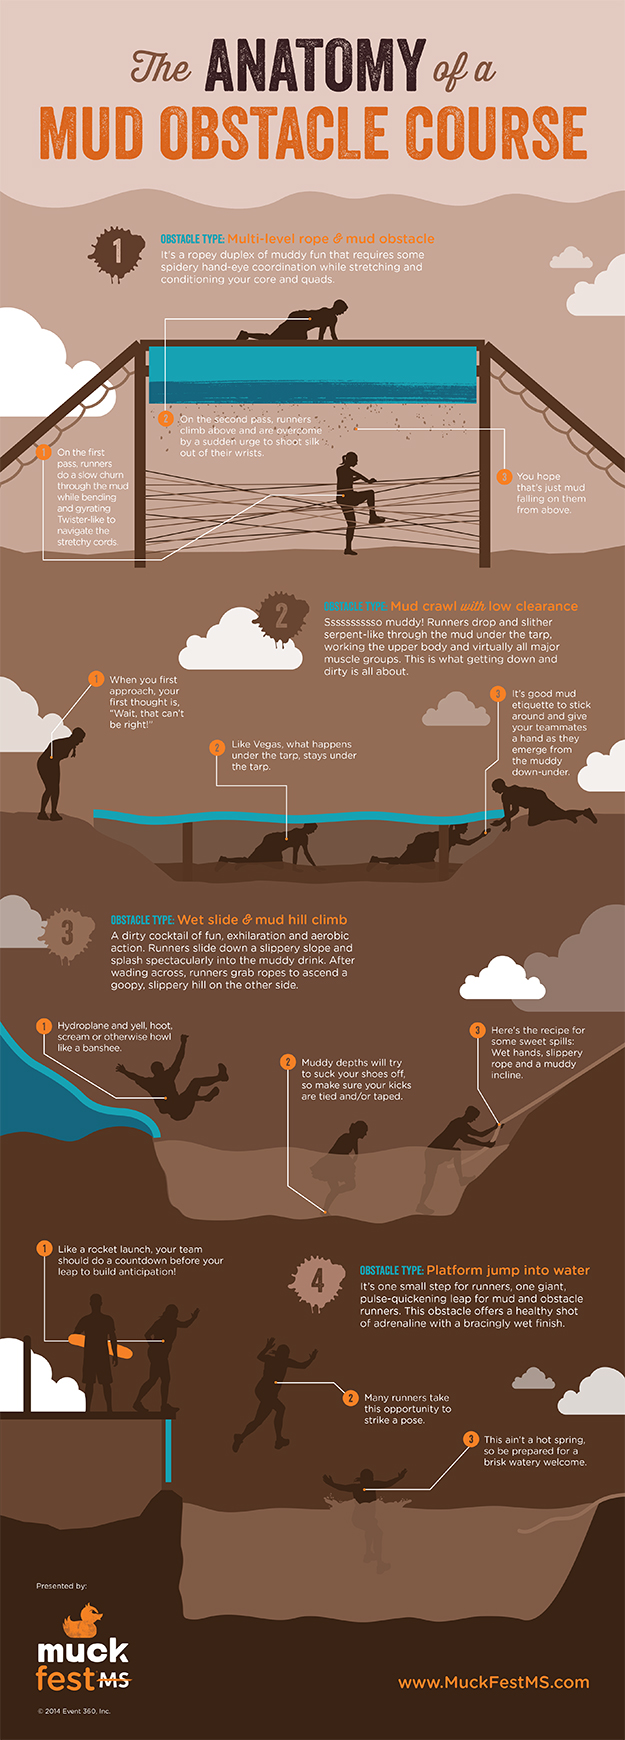 Anatomy of a Mud Obstacle Course